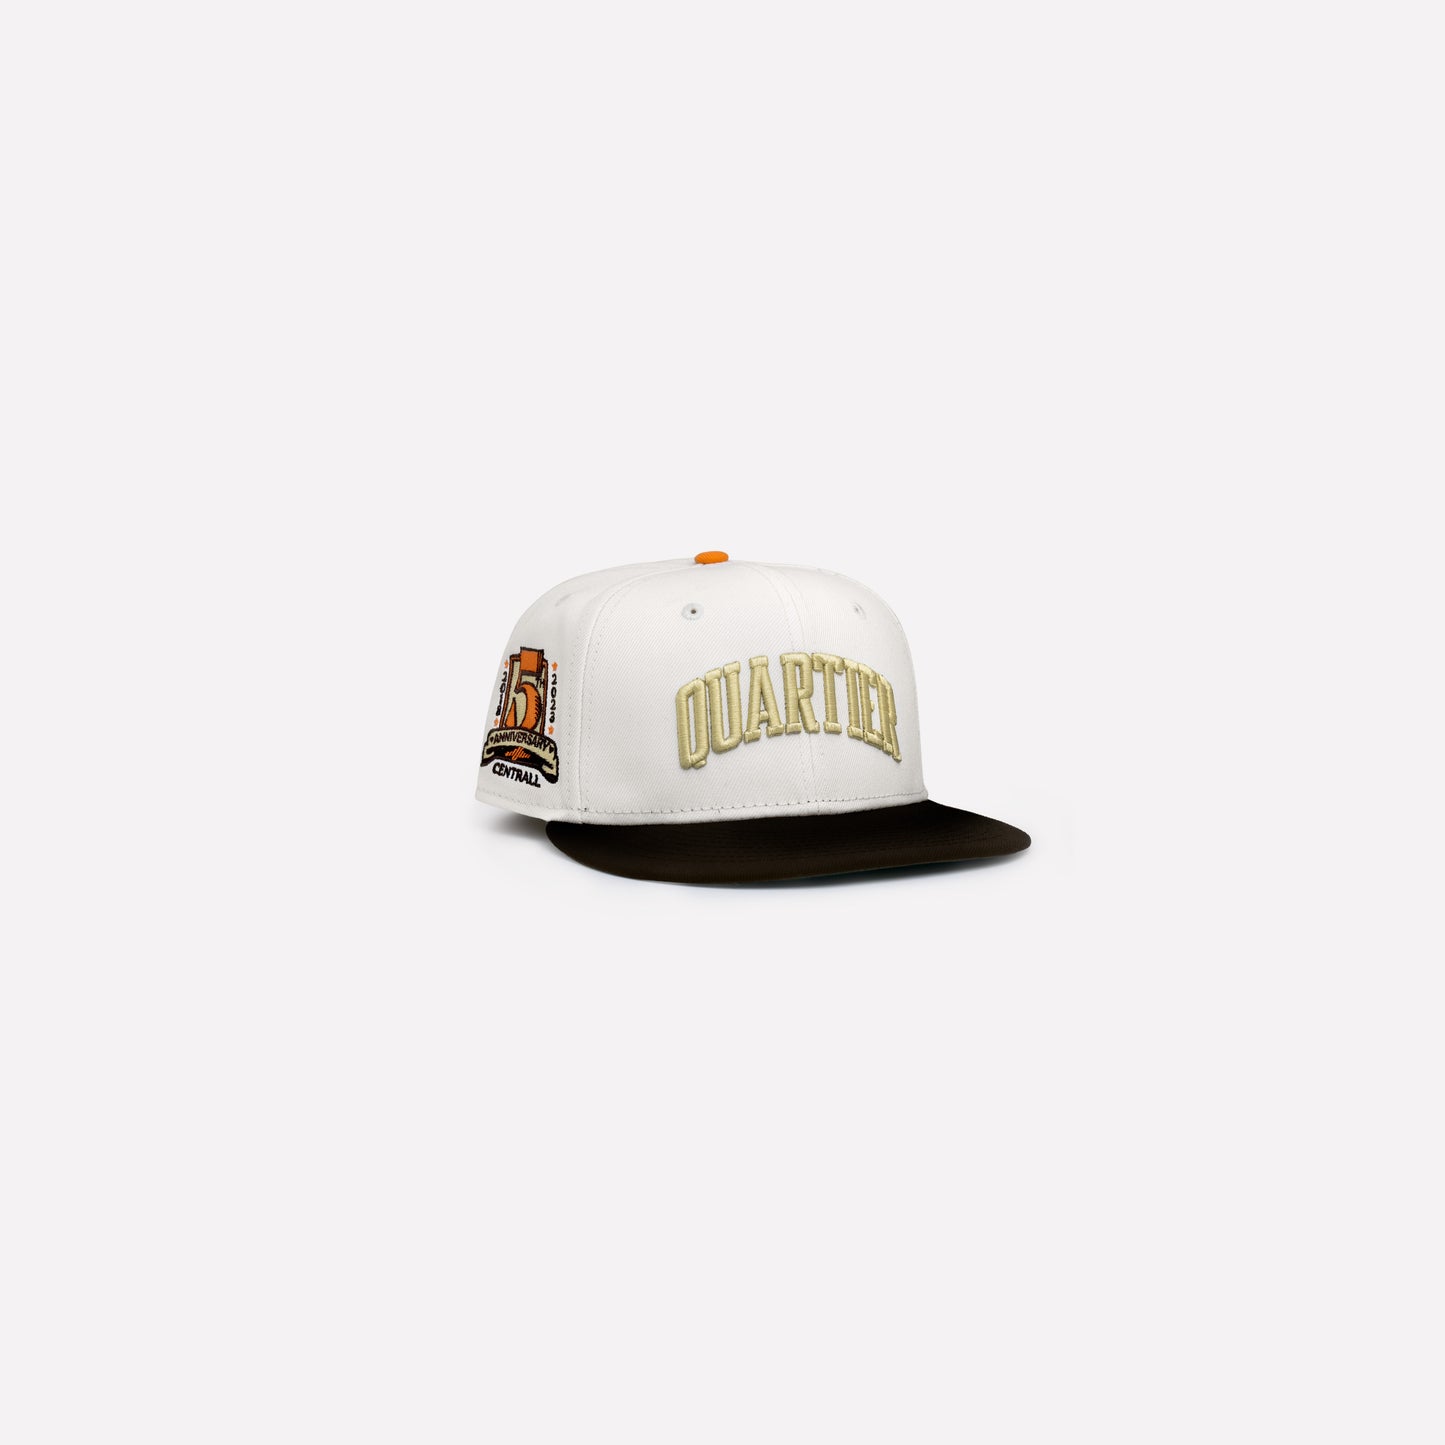 QUARTIER- CENTRALL 5 YEAR ANNIVERSARY FITTED